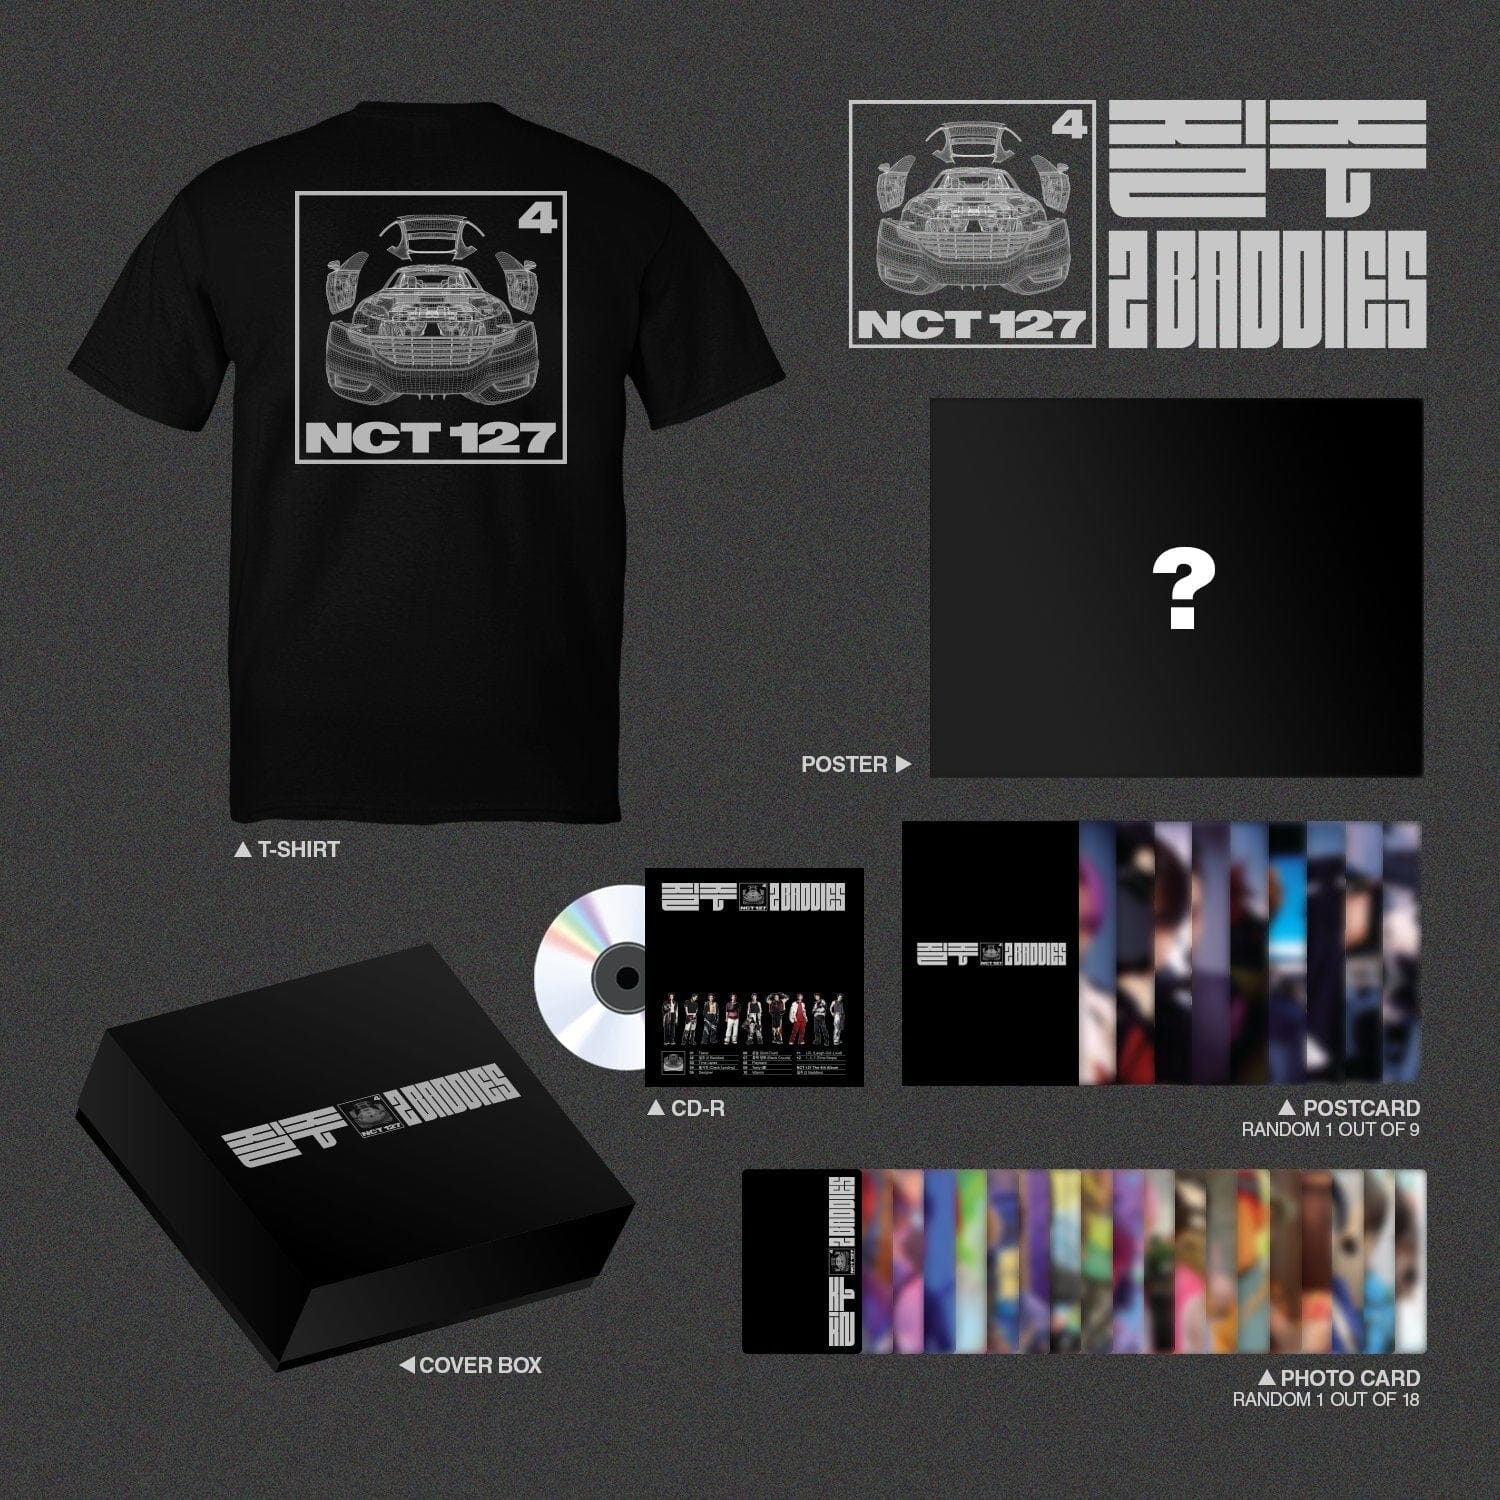 [SGS] NCT 127 The 4th Album ‘2 Baddies’ Short Sleeve T-Shirts Deluxe Box Set + Extra Photocard